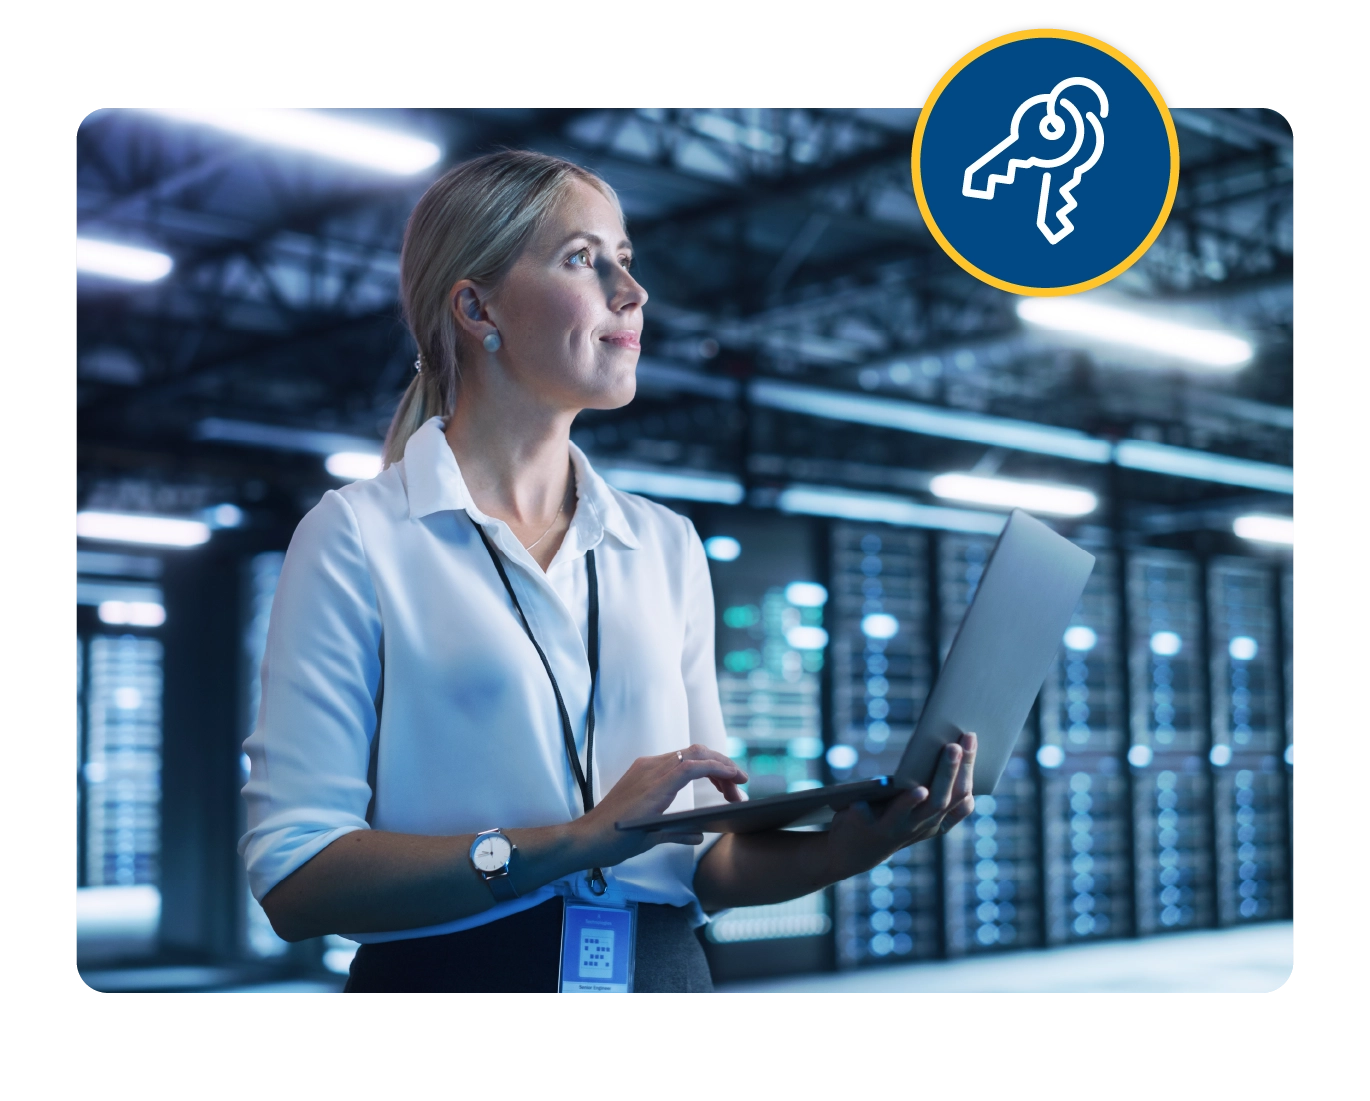 A woman stands in a data center with a tablet. An icon depicting a key appears on the right side.